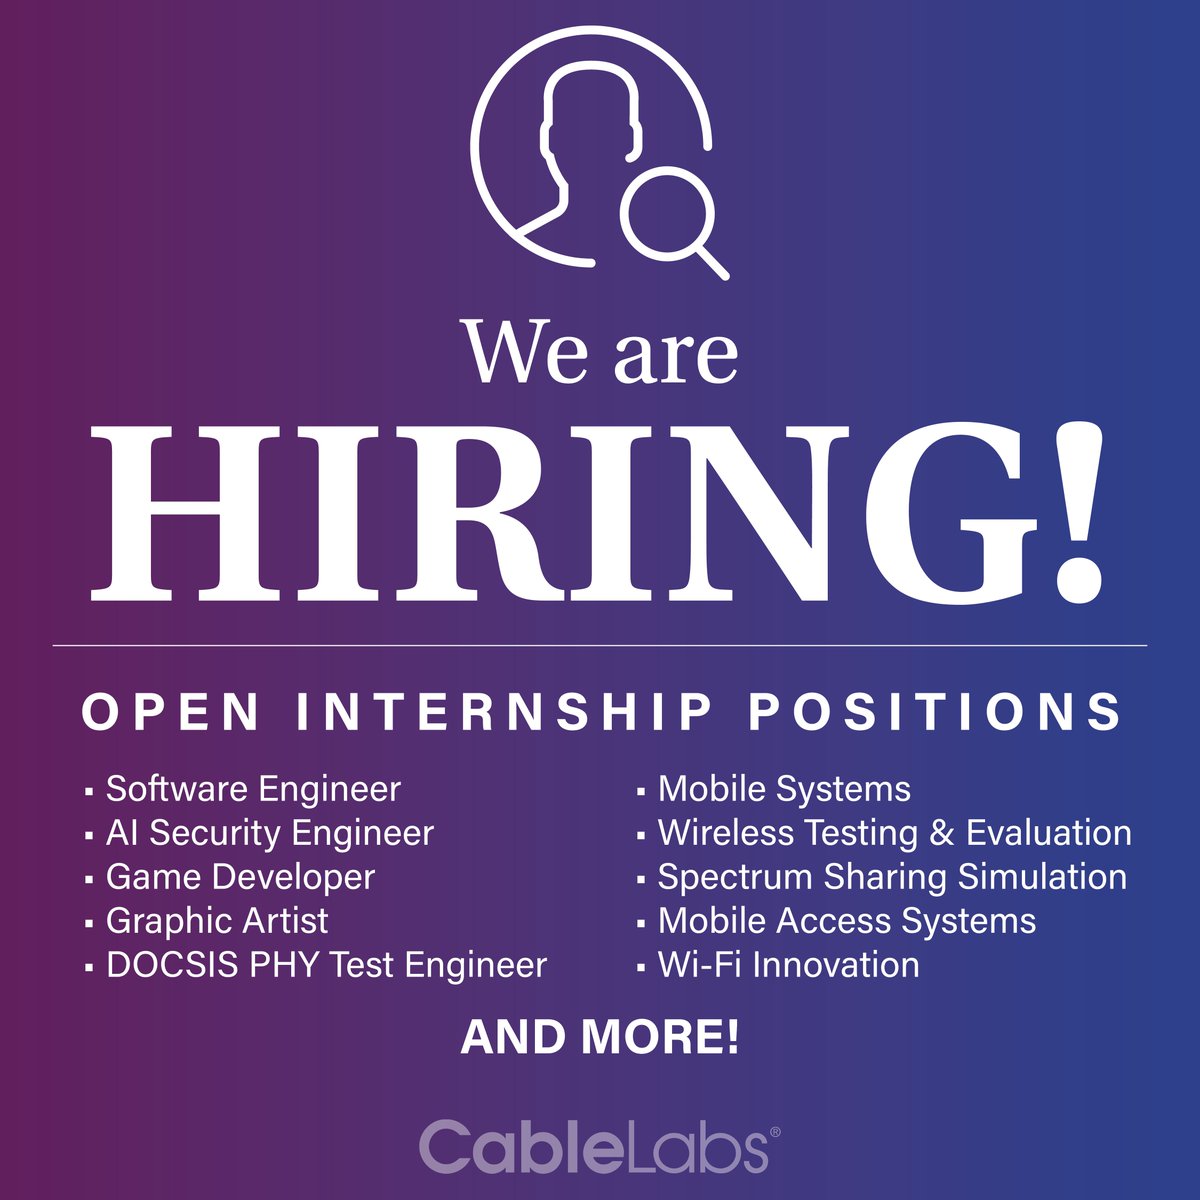 Dive into a sizzling summer with CableLabs! From #engineering to #design, our #internships cover a spectrum of roles. Apply now and make this summer one for the books 🌴☀️ cablela.bs/3IDitOR #internship #summerinternship #hiring